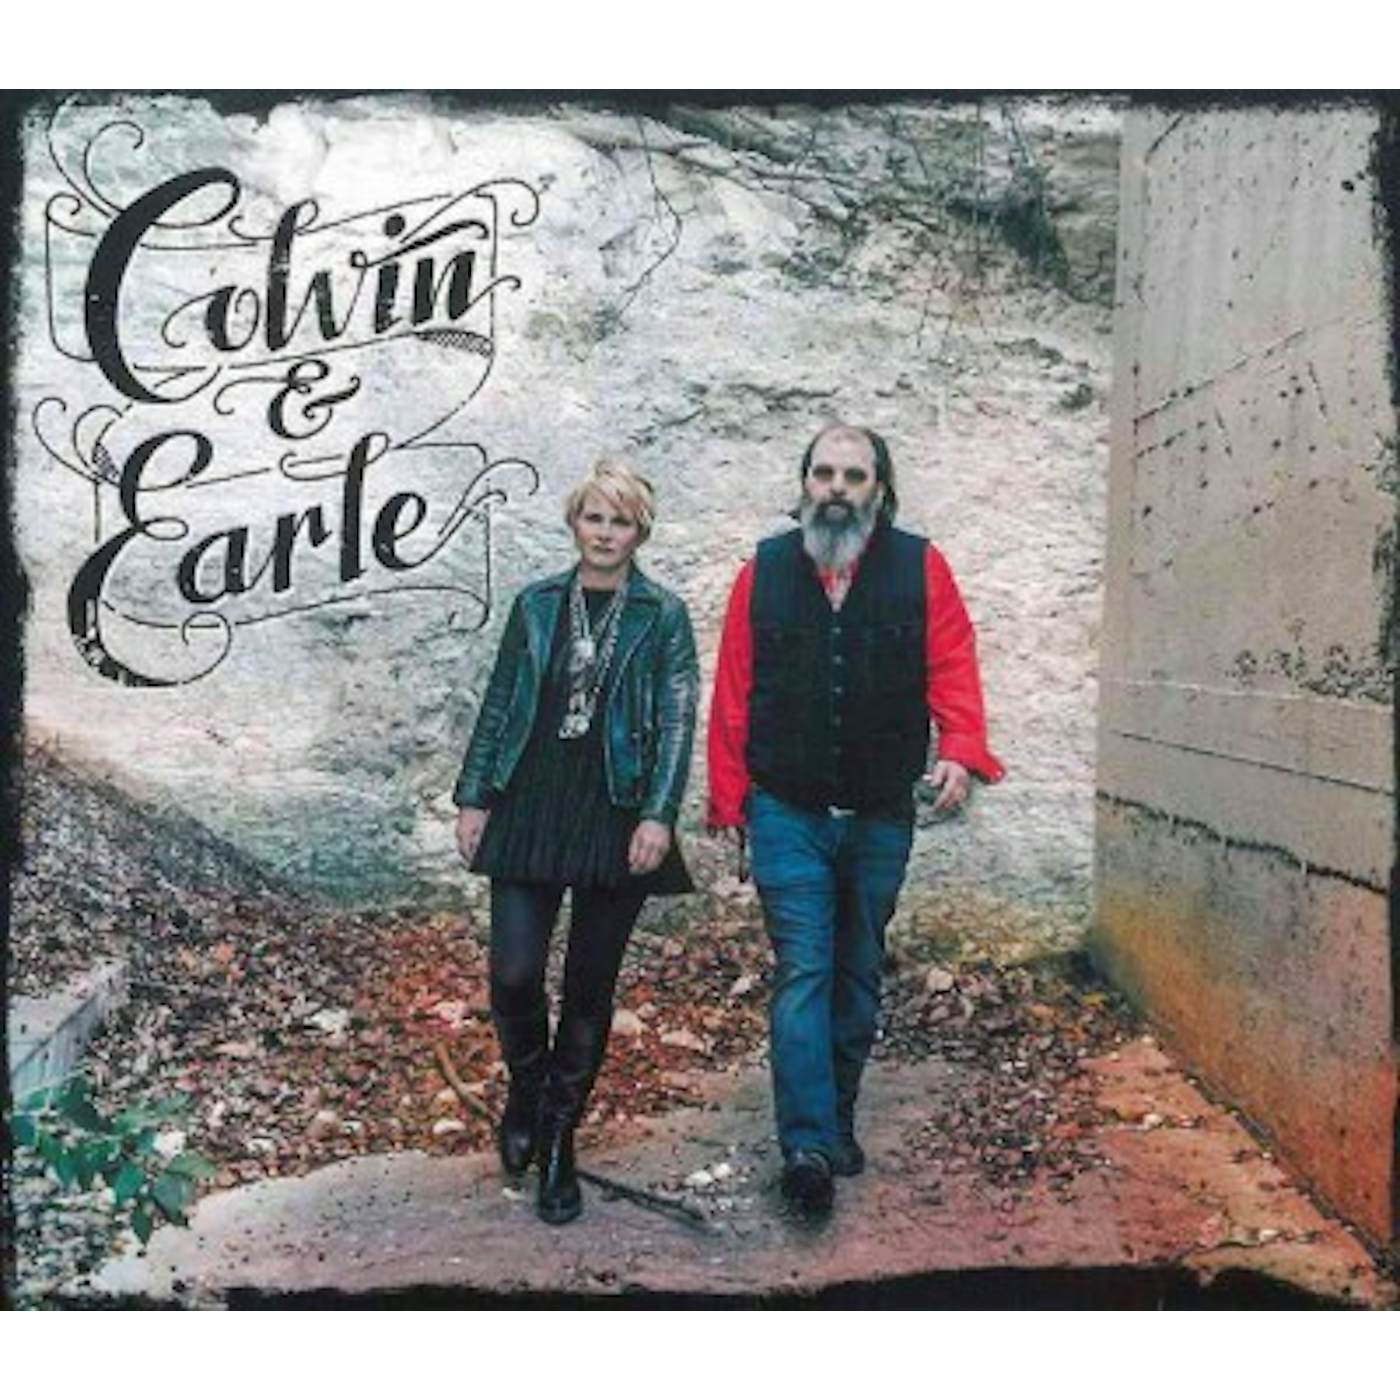 COLVIN & EARLE (DELUXE EDITION) CD